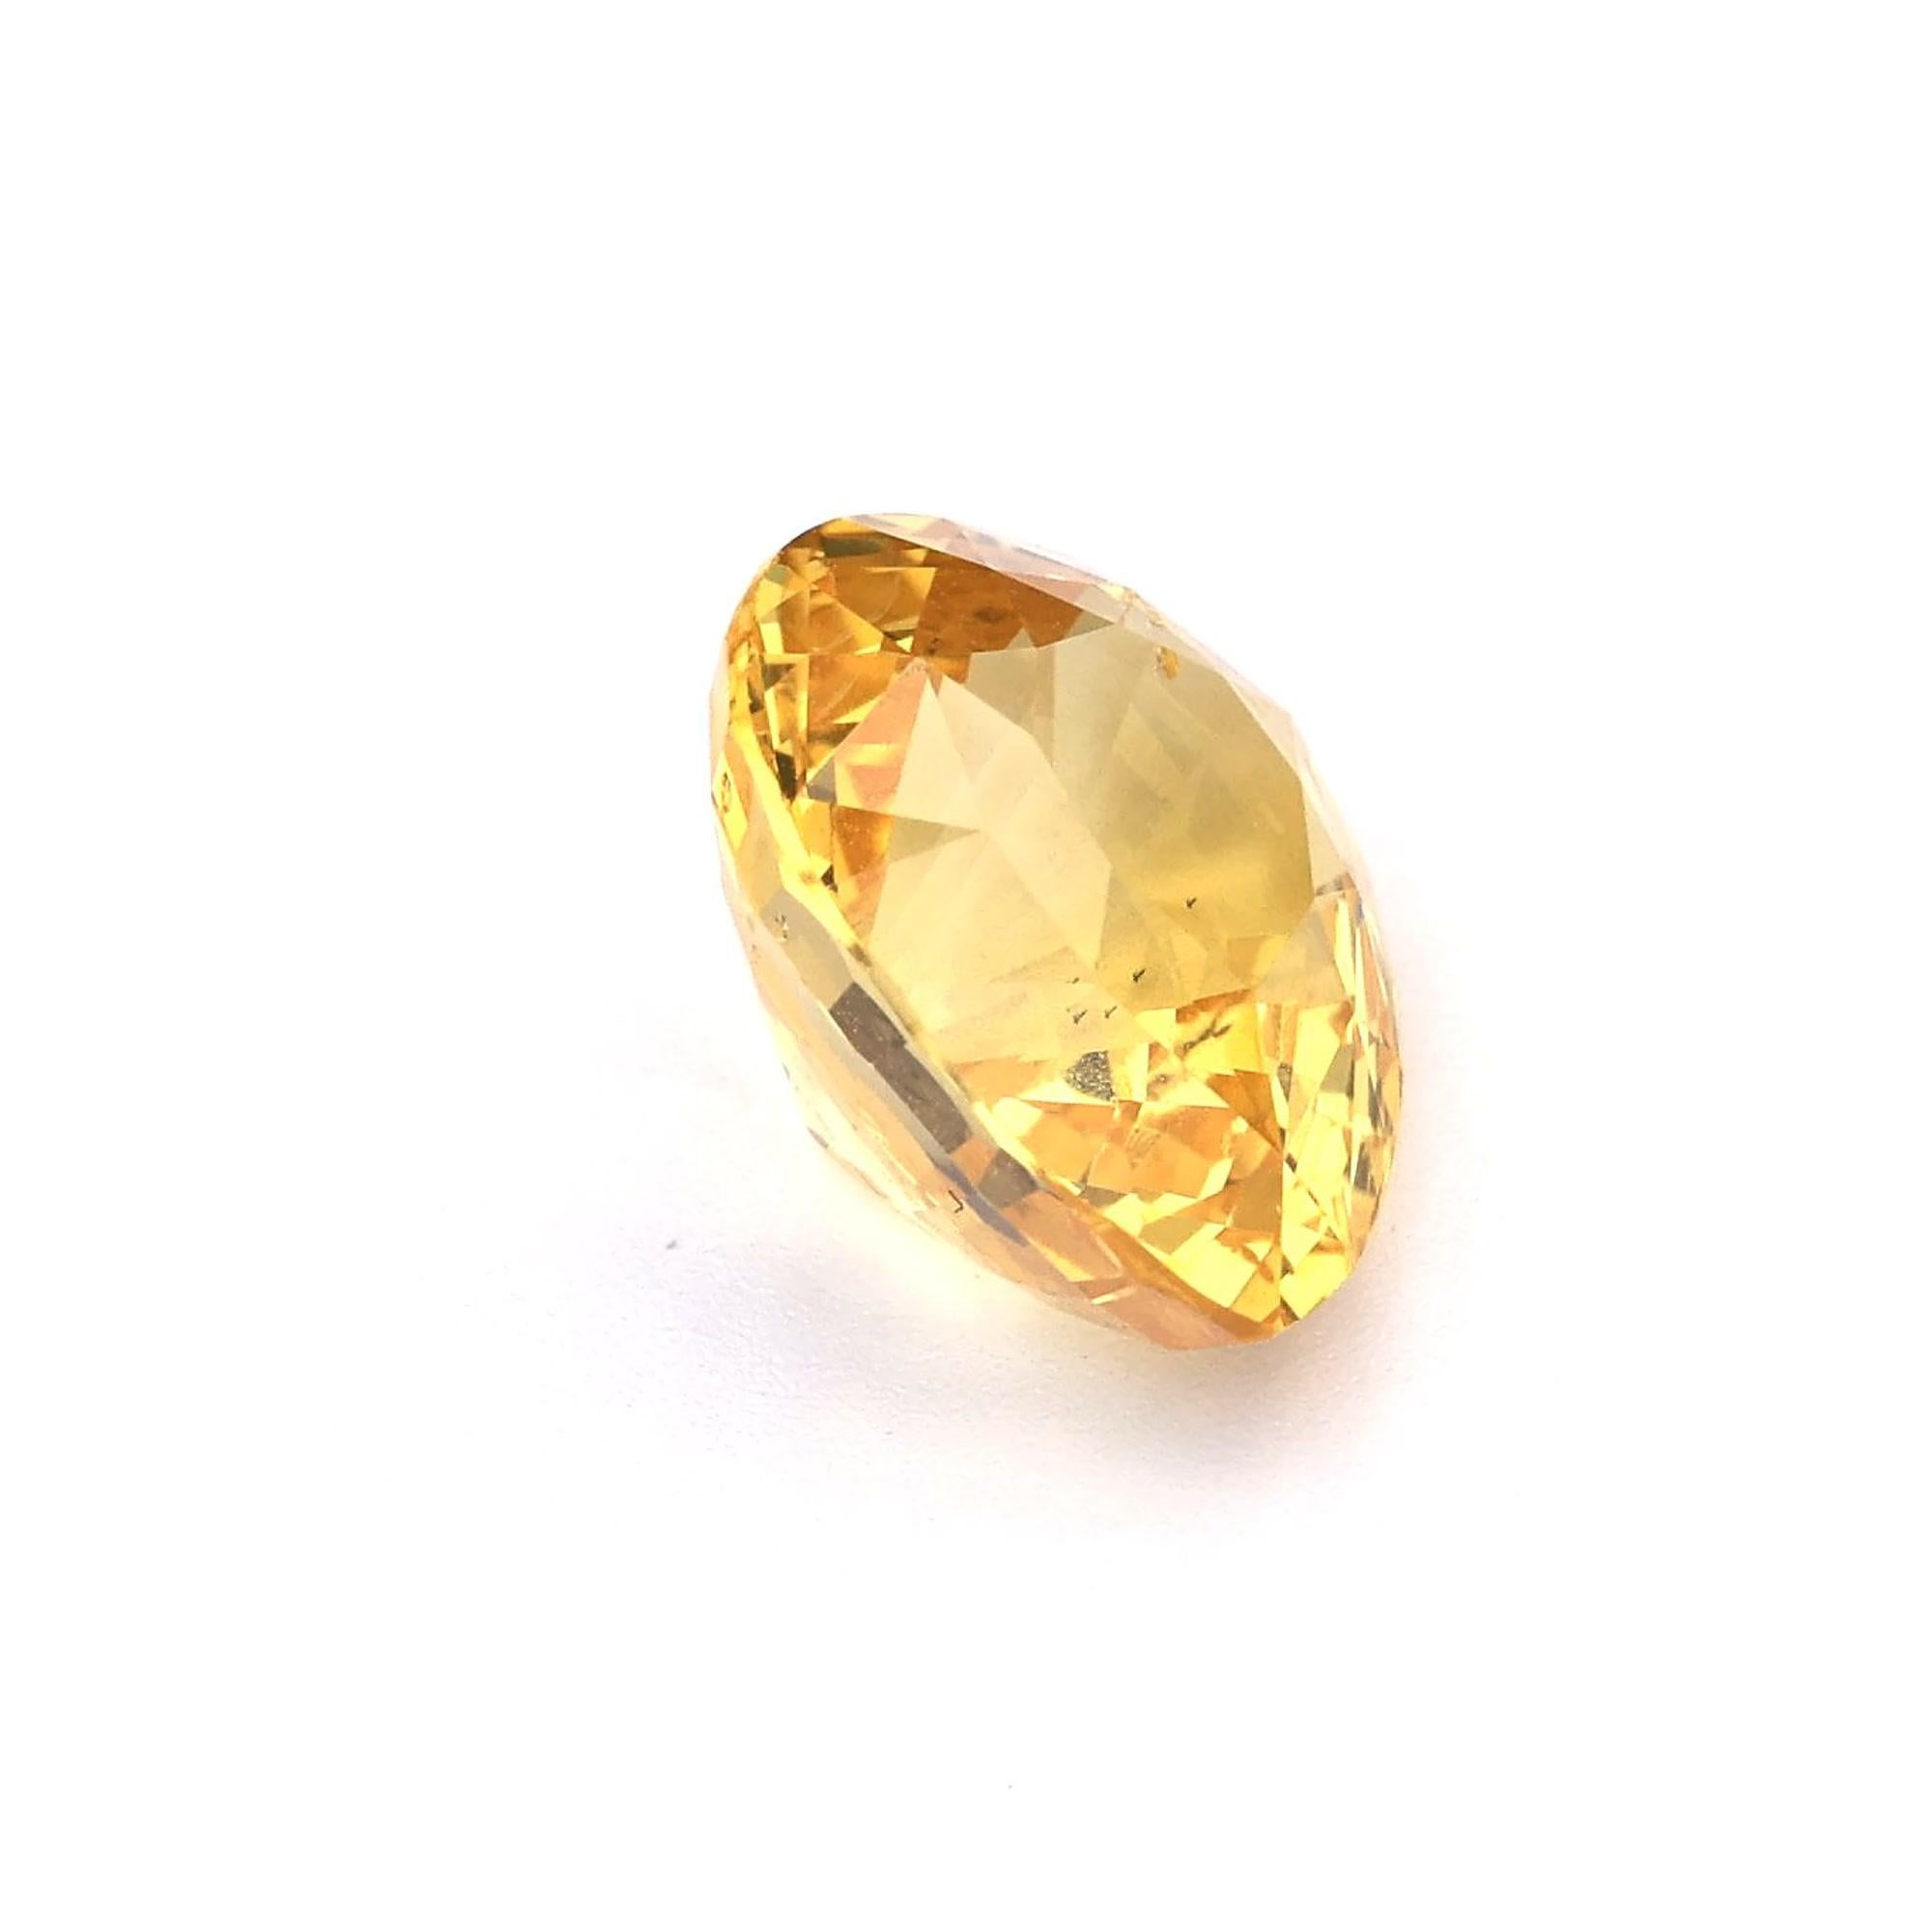 Certified 4.45 ct Natural Yellow Sapphire Pear Shape Ceylon Origin Ring Stone For Sale 2